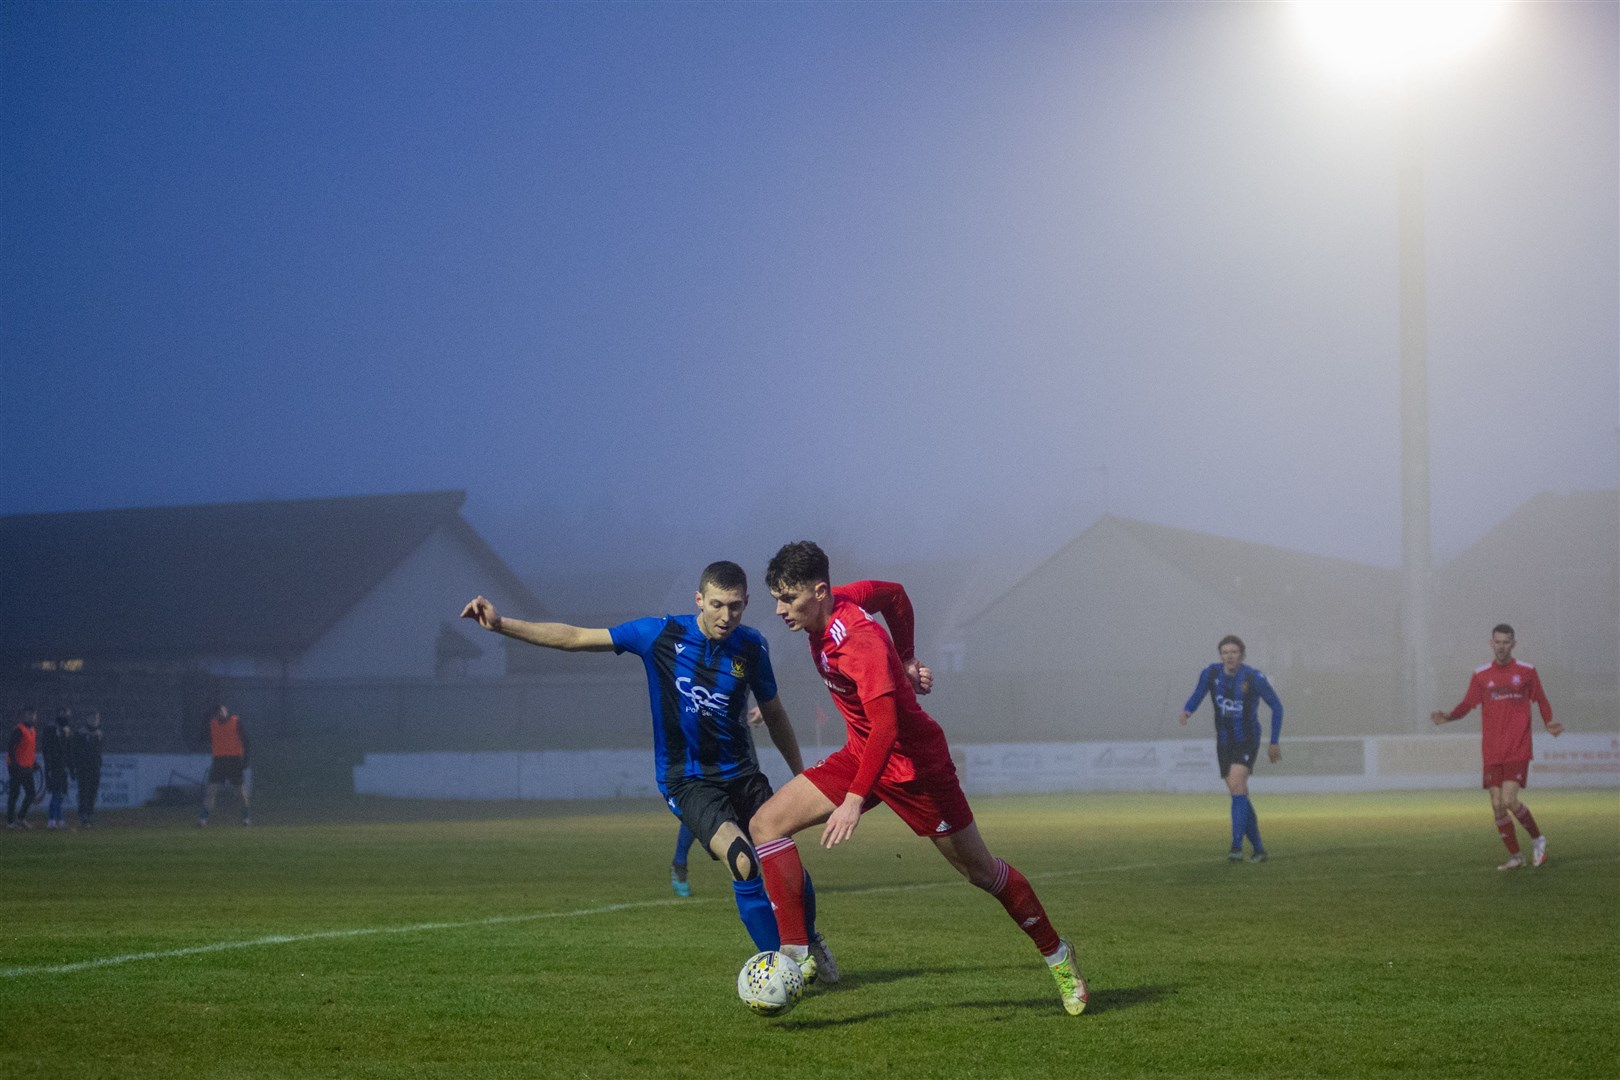 Brodie Allen scored in Lossiemouth's 4-1 defeat to Huntly. Pture: Daniel Forsyth